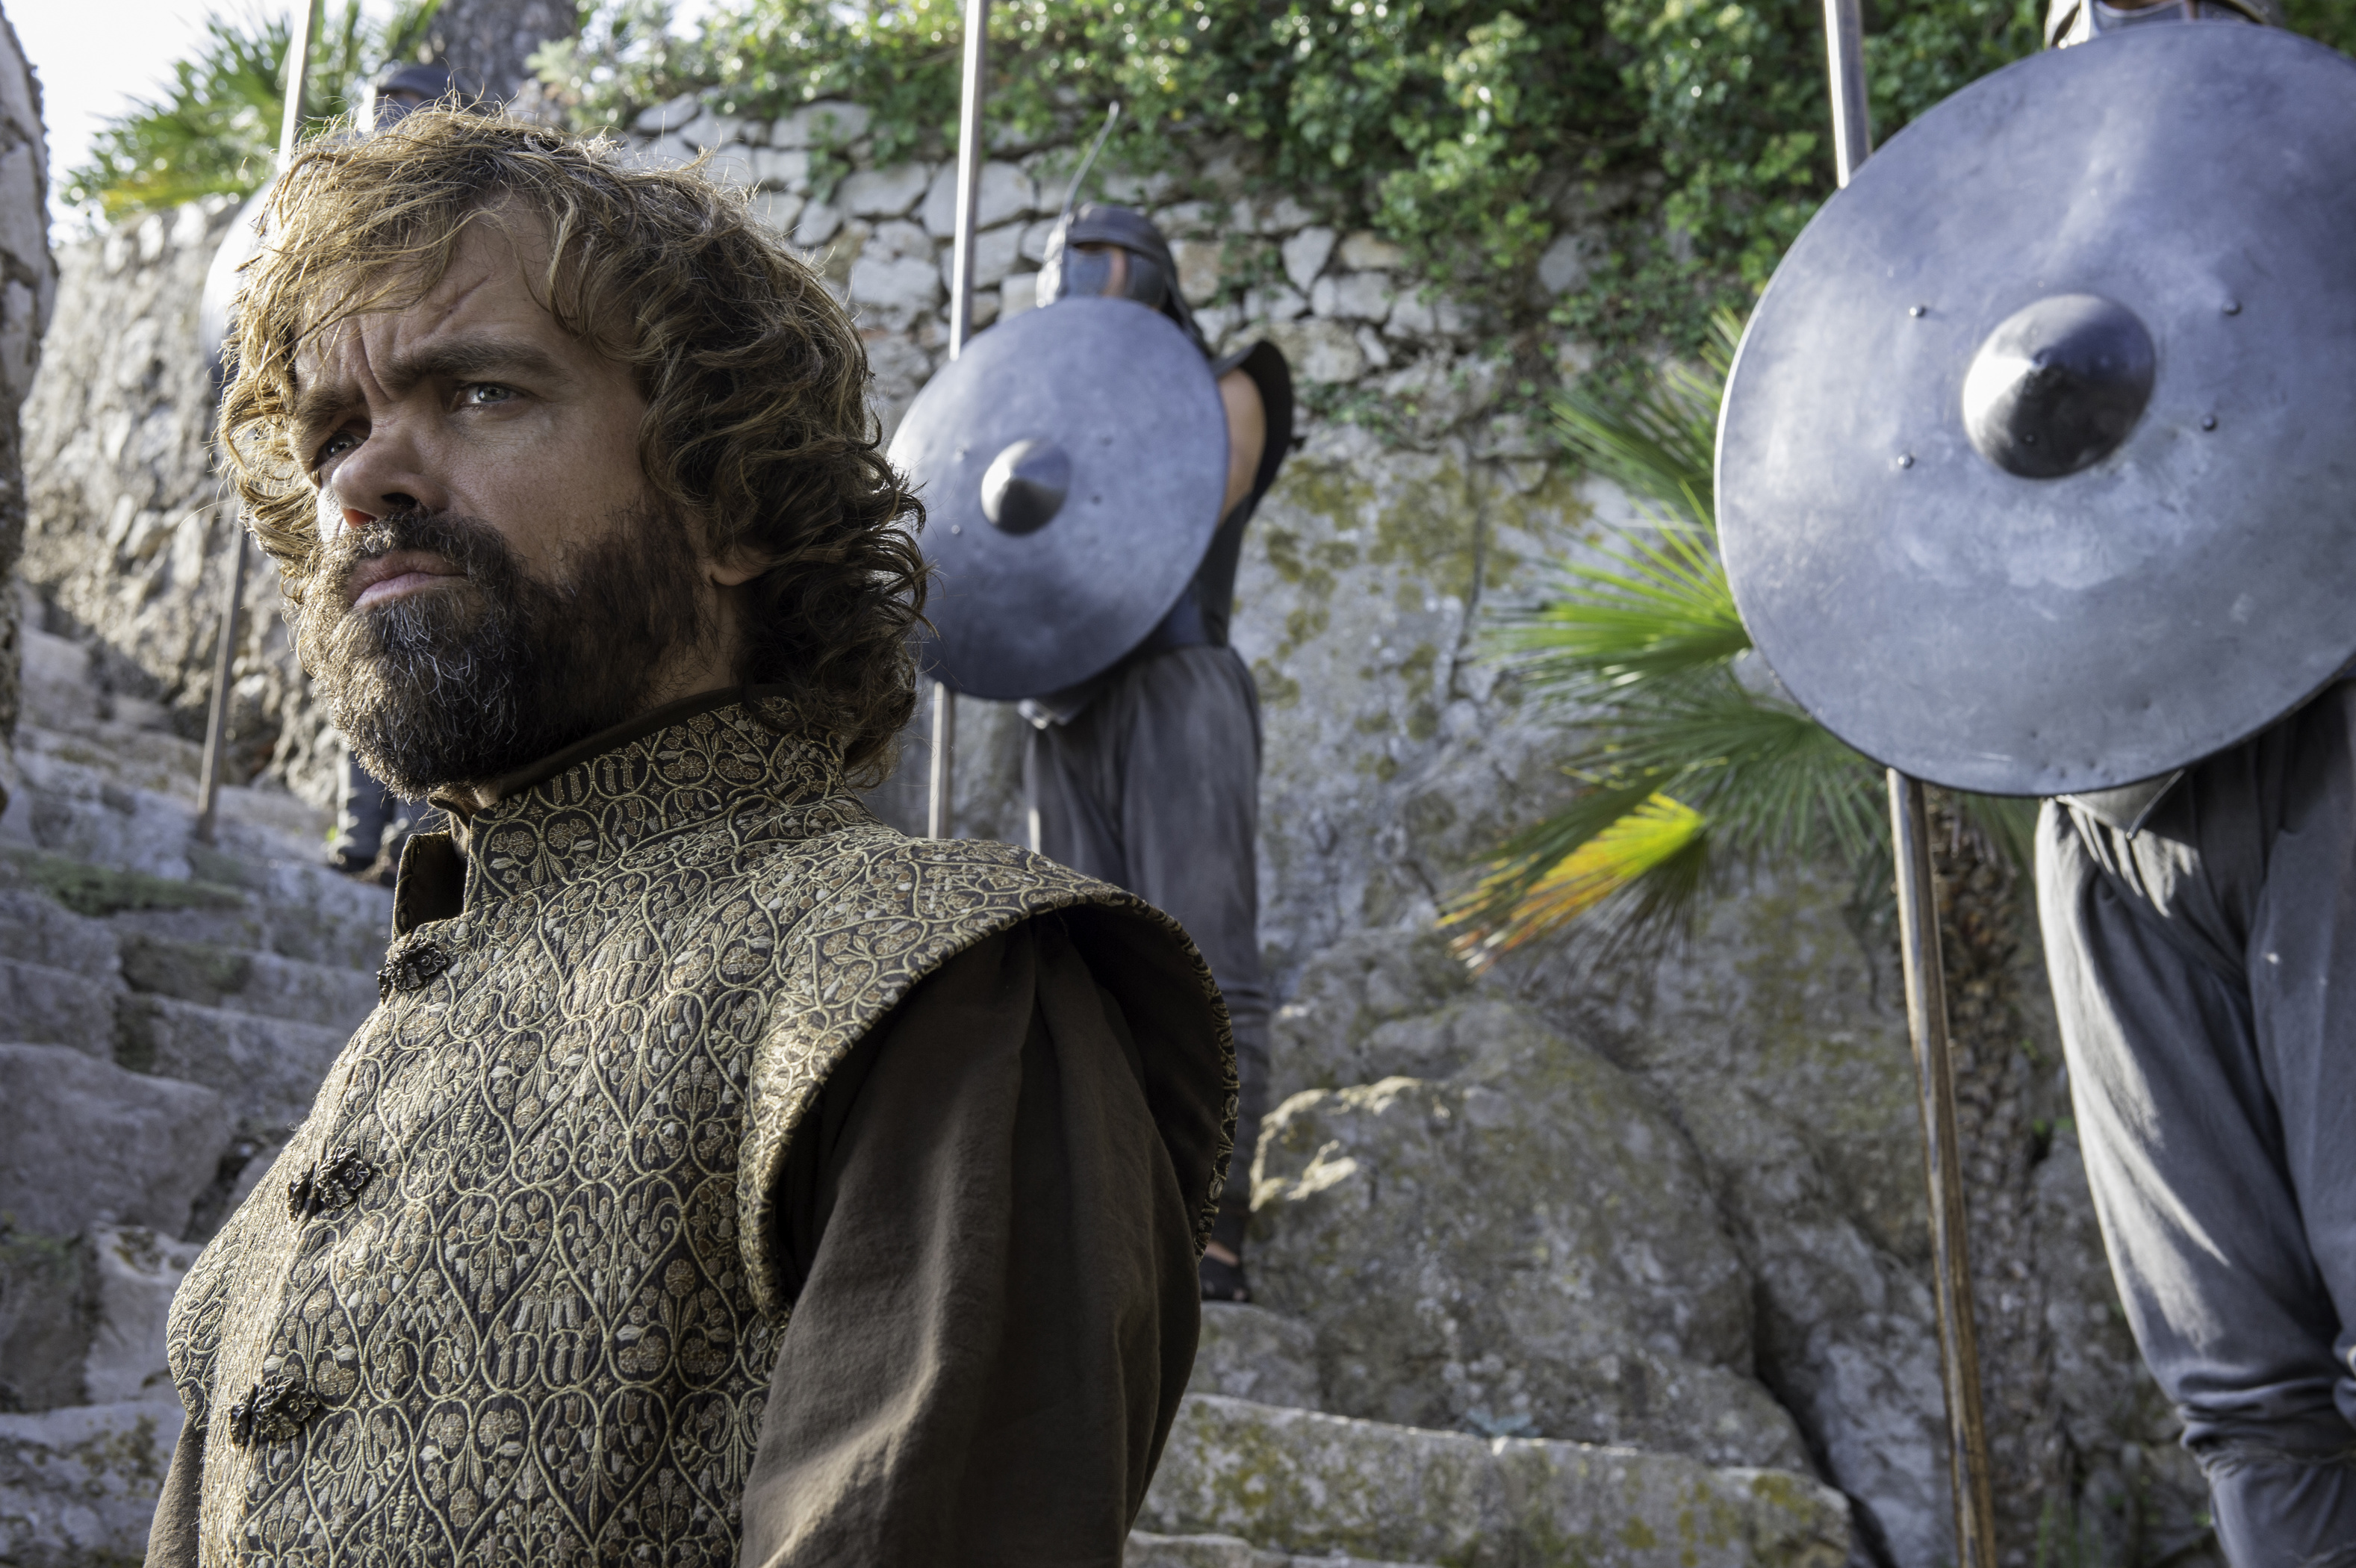 Game of Thrones 402 - Tyrion with a staircase and soldiers behind him